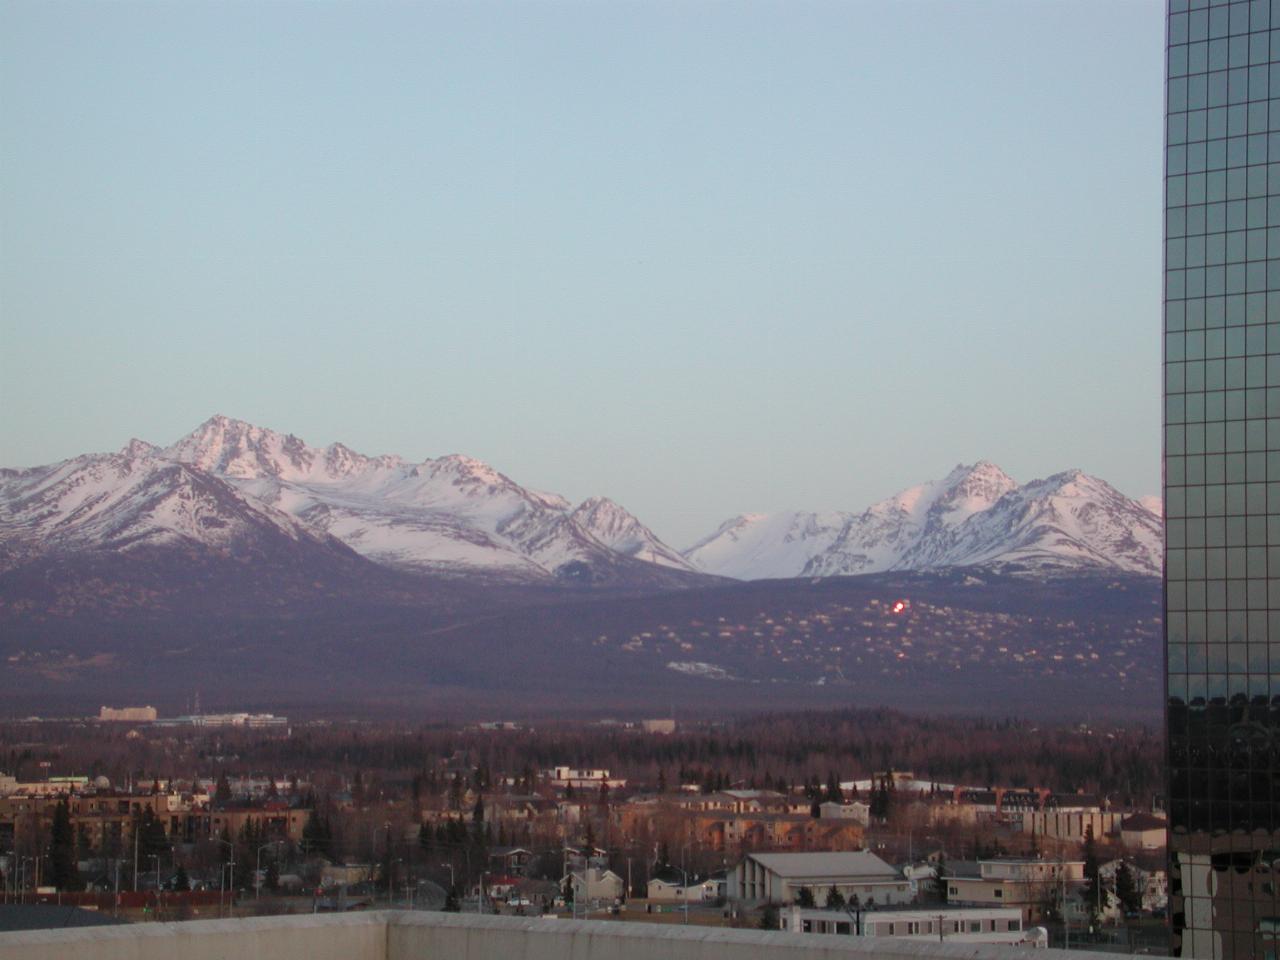 Sunset on the mountains east of Anchorage, as seen from my room at Westmark Hotel